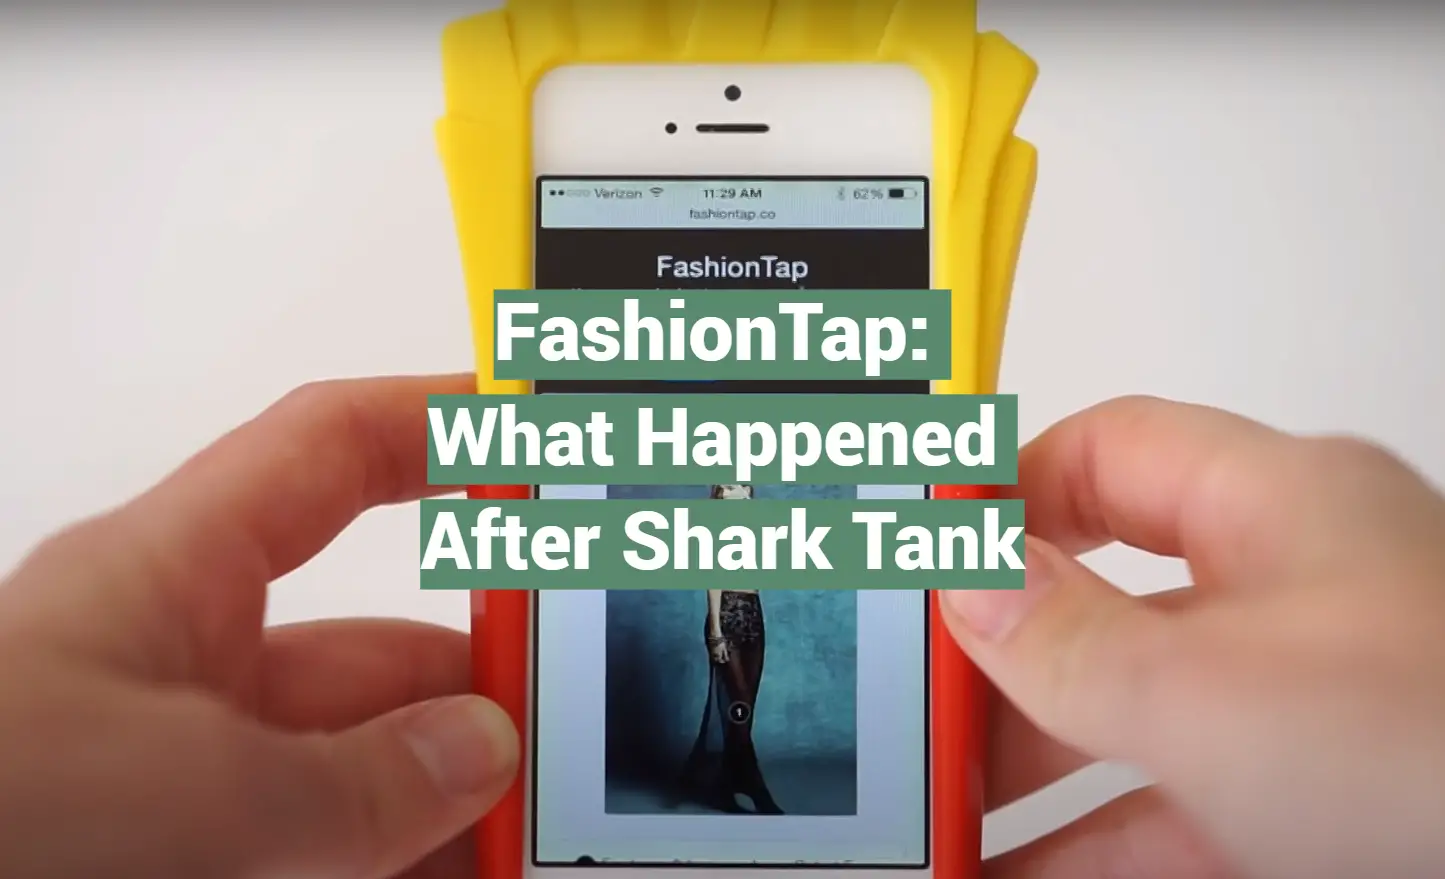 FashionTap: What Happened After Shark Tank